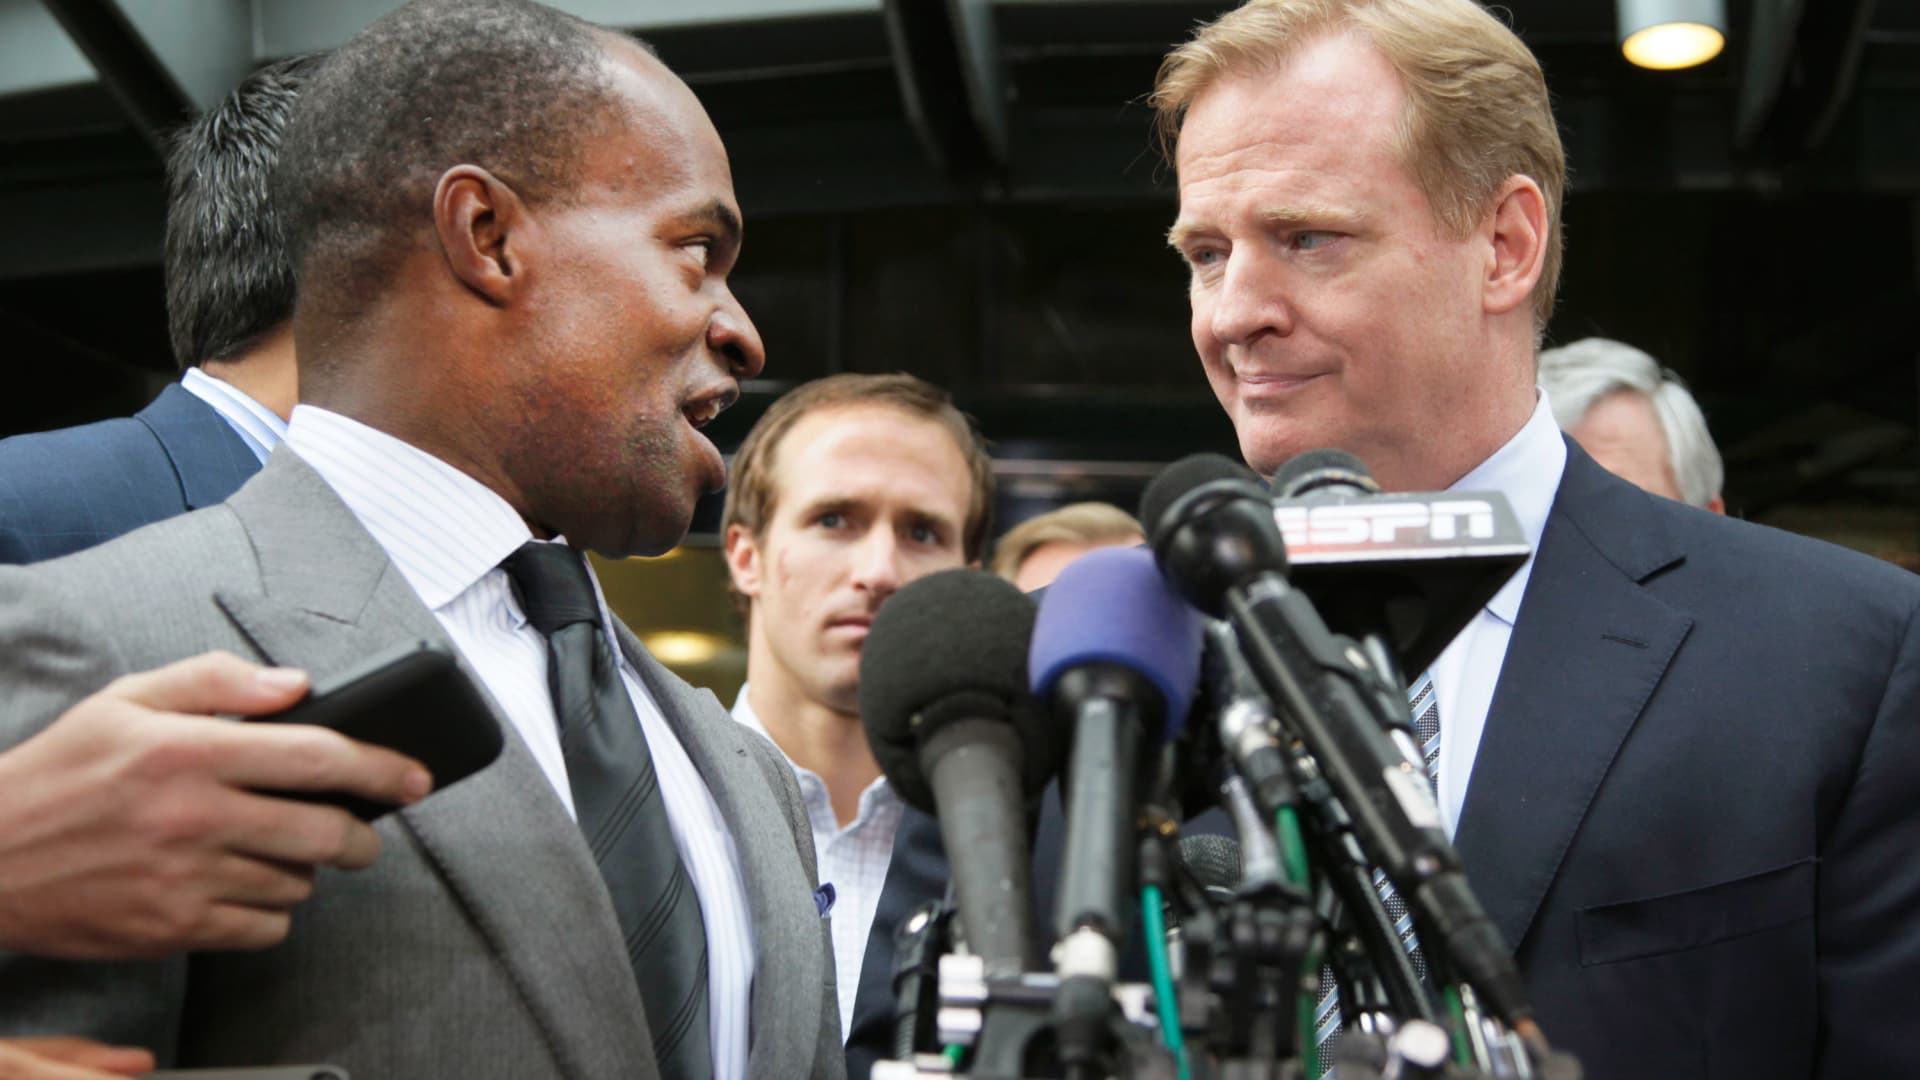 In this July 25, 2011, file photo, NFLPA Executive Director DeMaurice Smith, left, and NFL football Commissioner Roger Goodell take part in a news conference at the NFL Players Association in Washington.